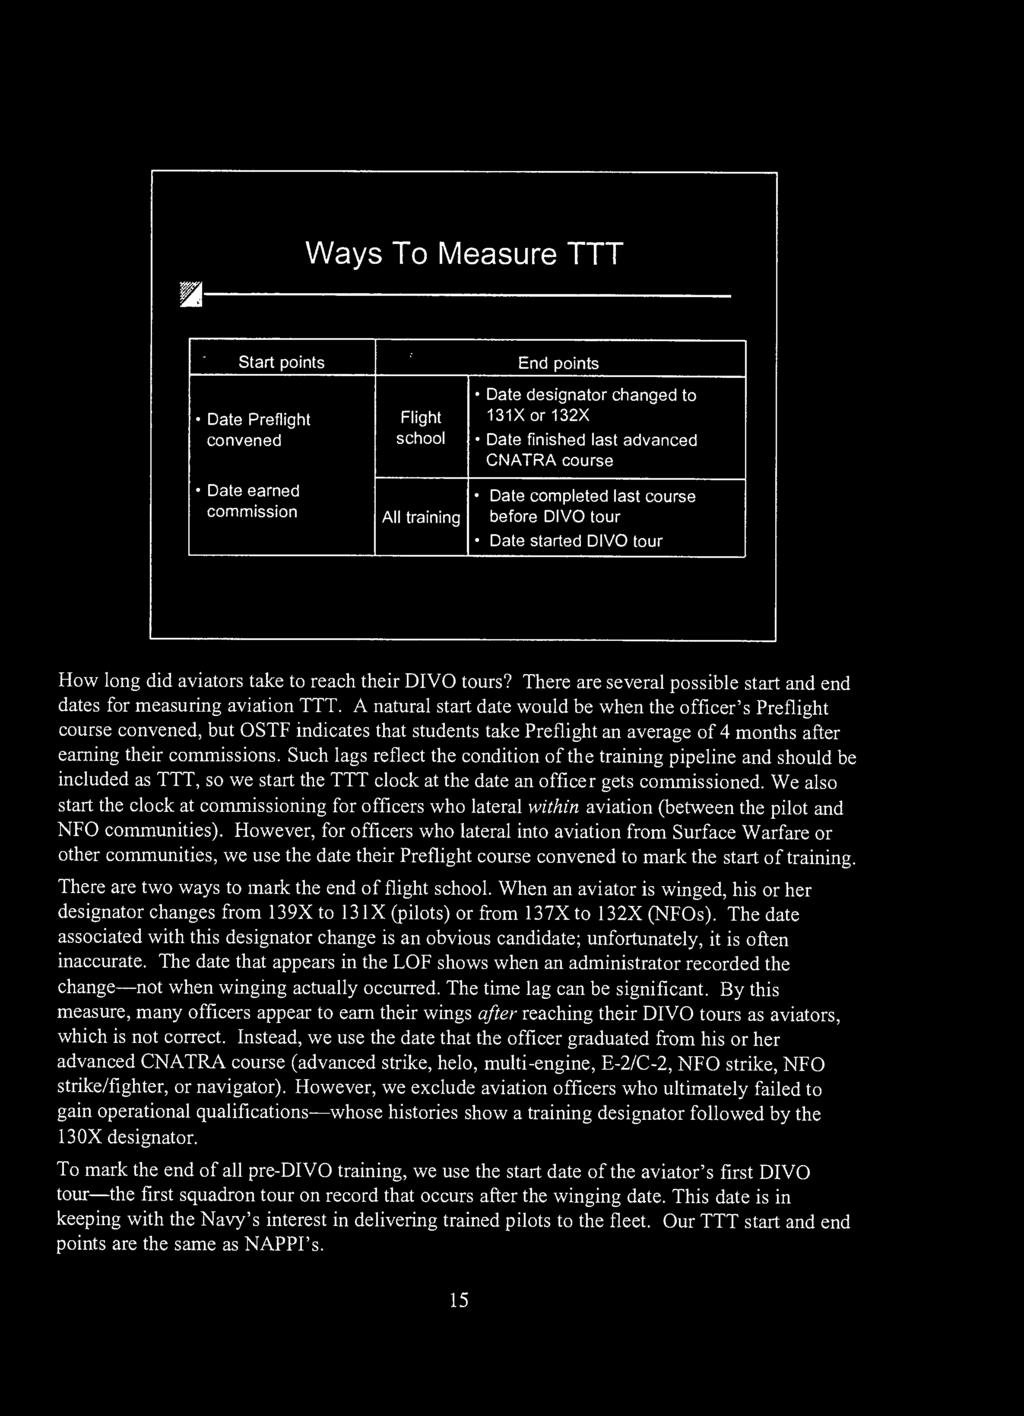 1- Ways To Measure TTT Start points Date Preflight convened Date earned commission Flight school All training End points Date designator changed to 131Xor132X Date finished last advanced CNATRA